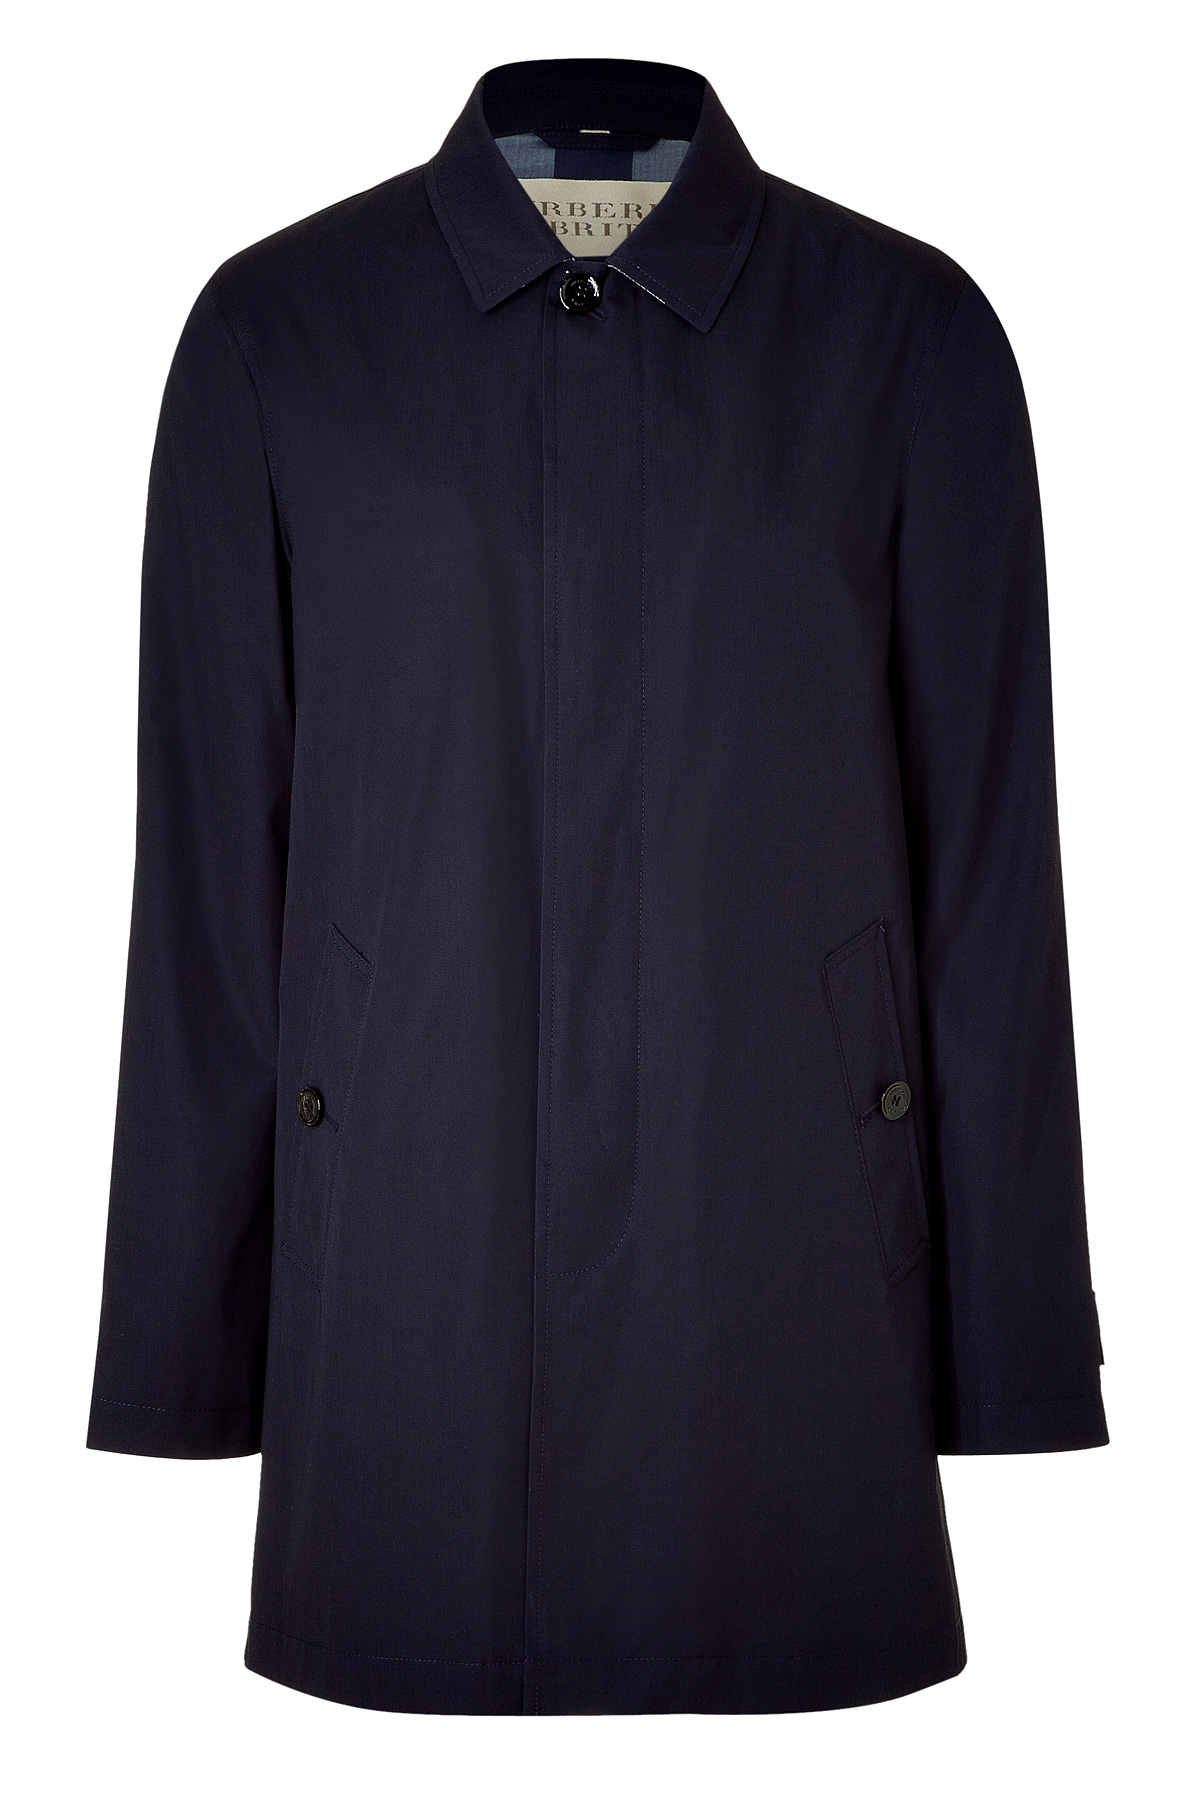 Lyst - Burberry brit Navy Check Lined Langley Mac Coat in Blue for Men